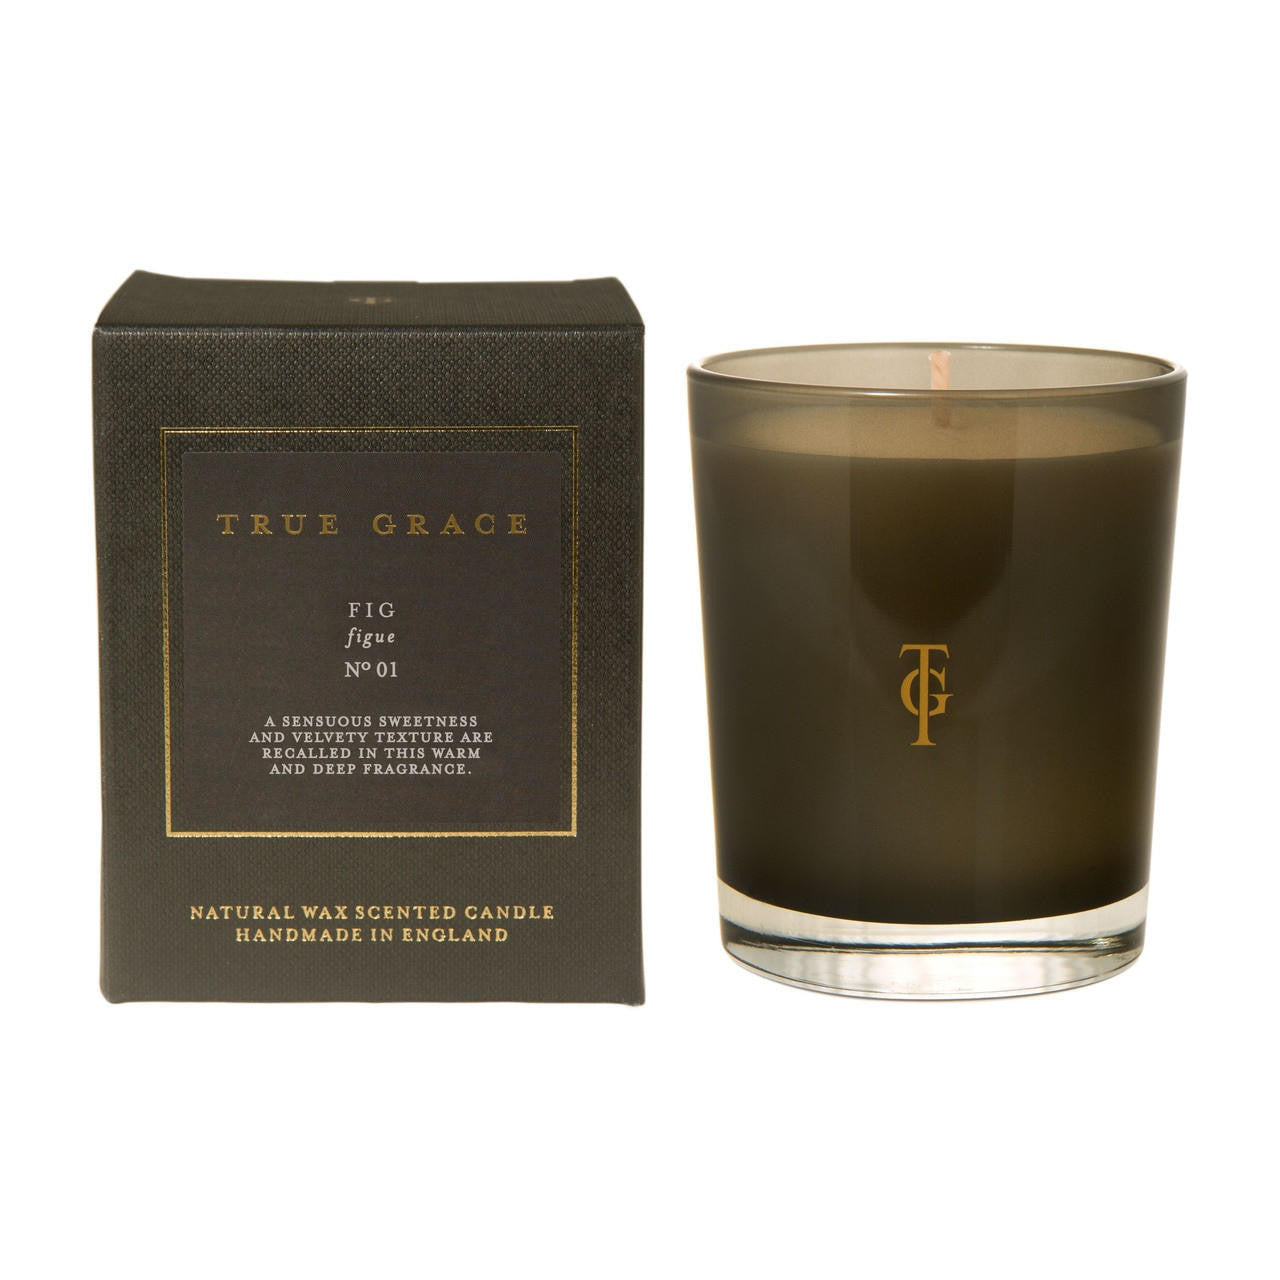  True Grace Fig Candle 